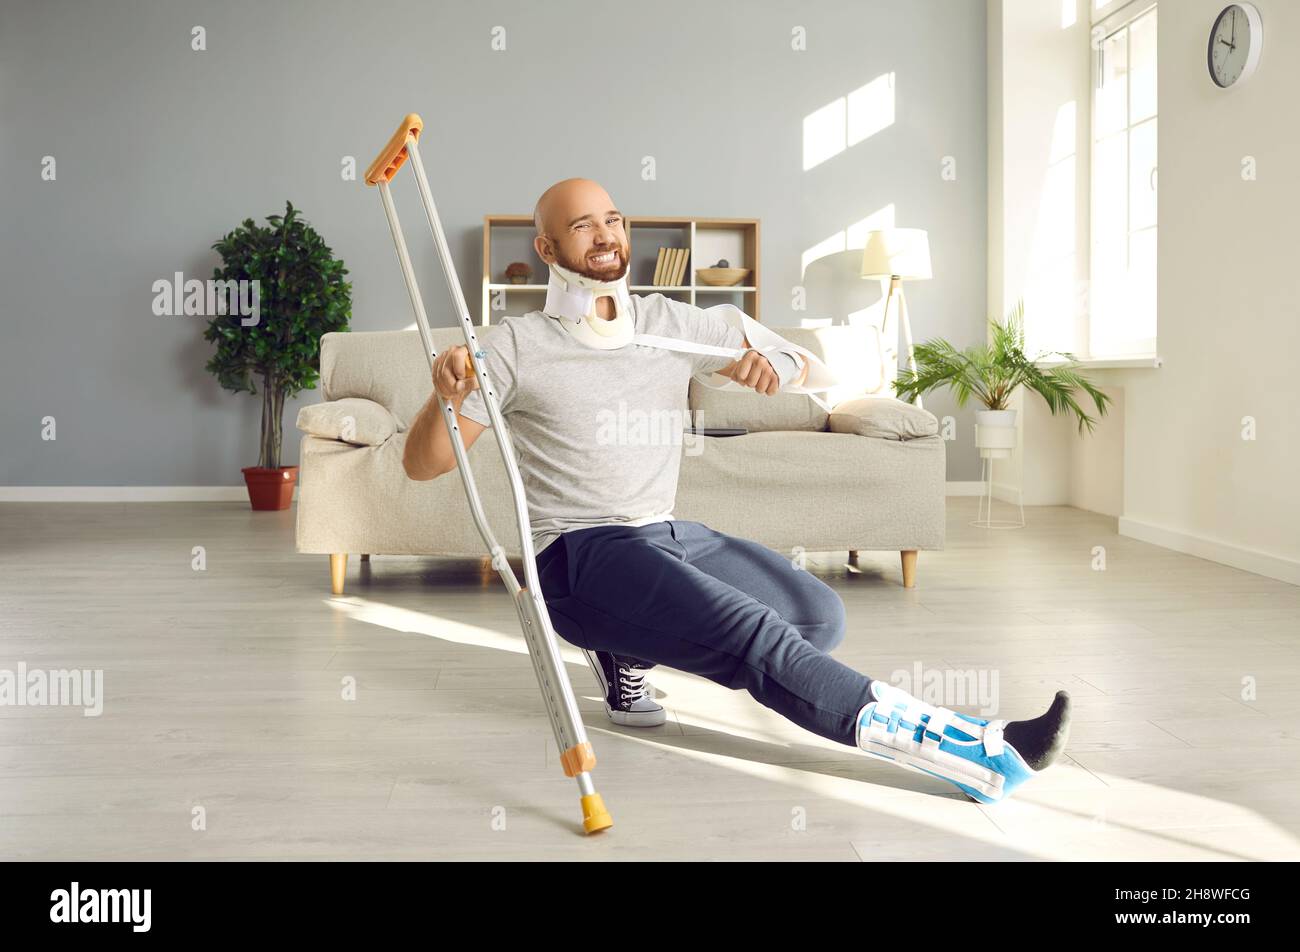 Happy, crazy patient with broken neck and other injuries having fun while recovering at home Stock Photo